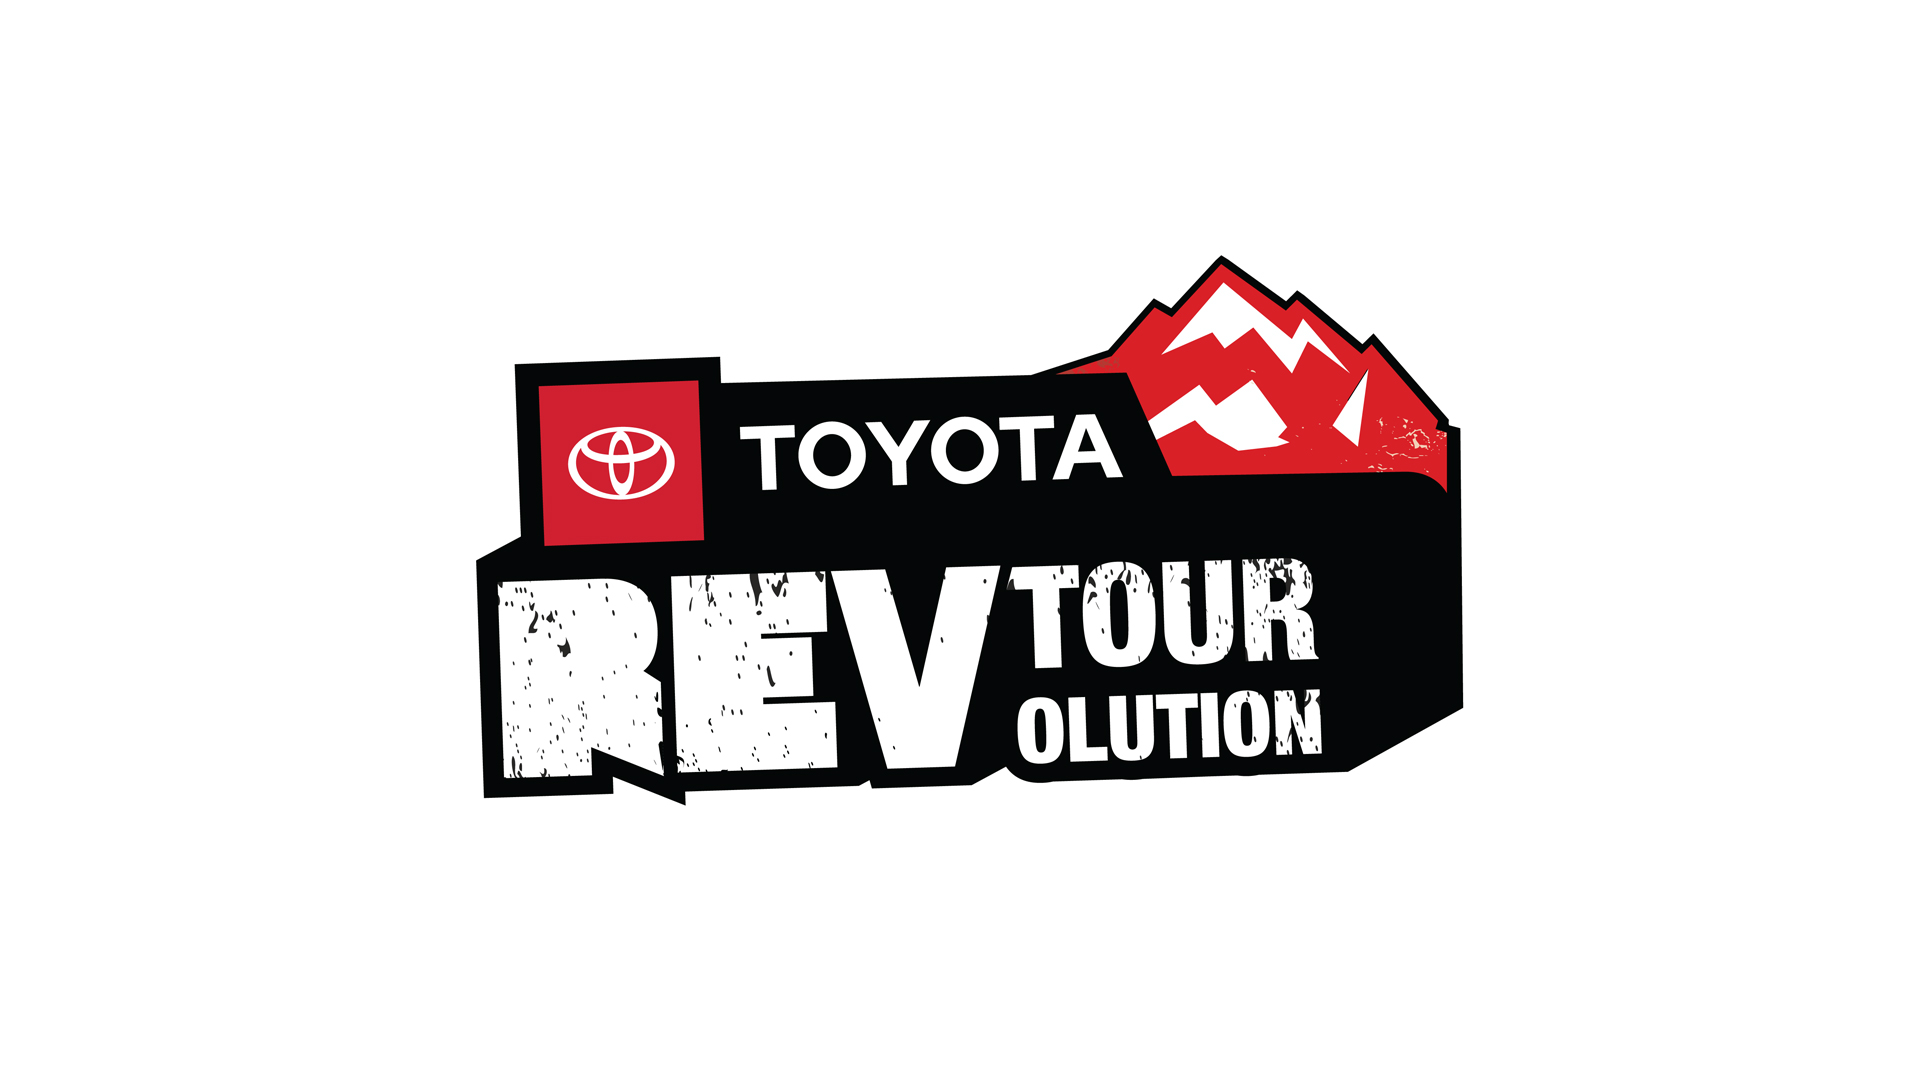 Rev Tour Launches with Improved Athlete Pipeline